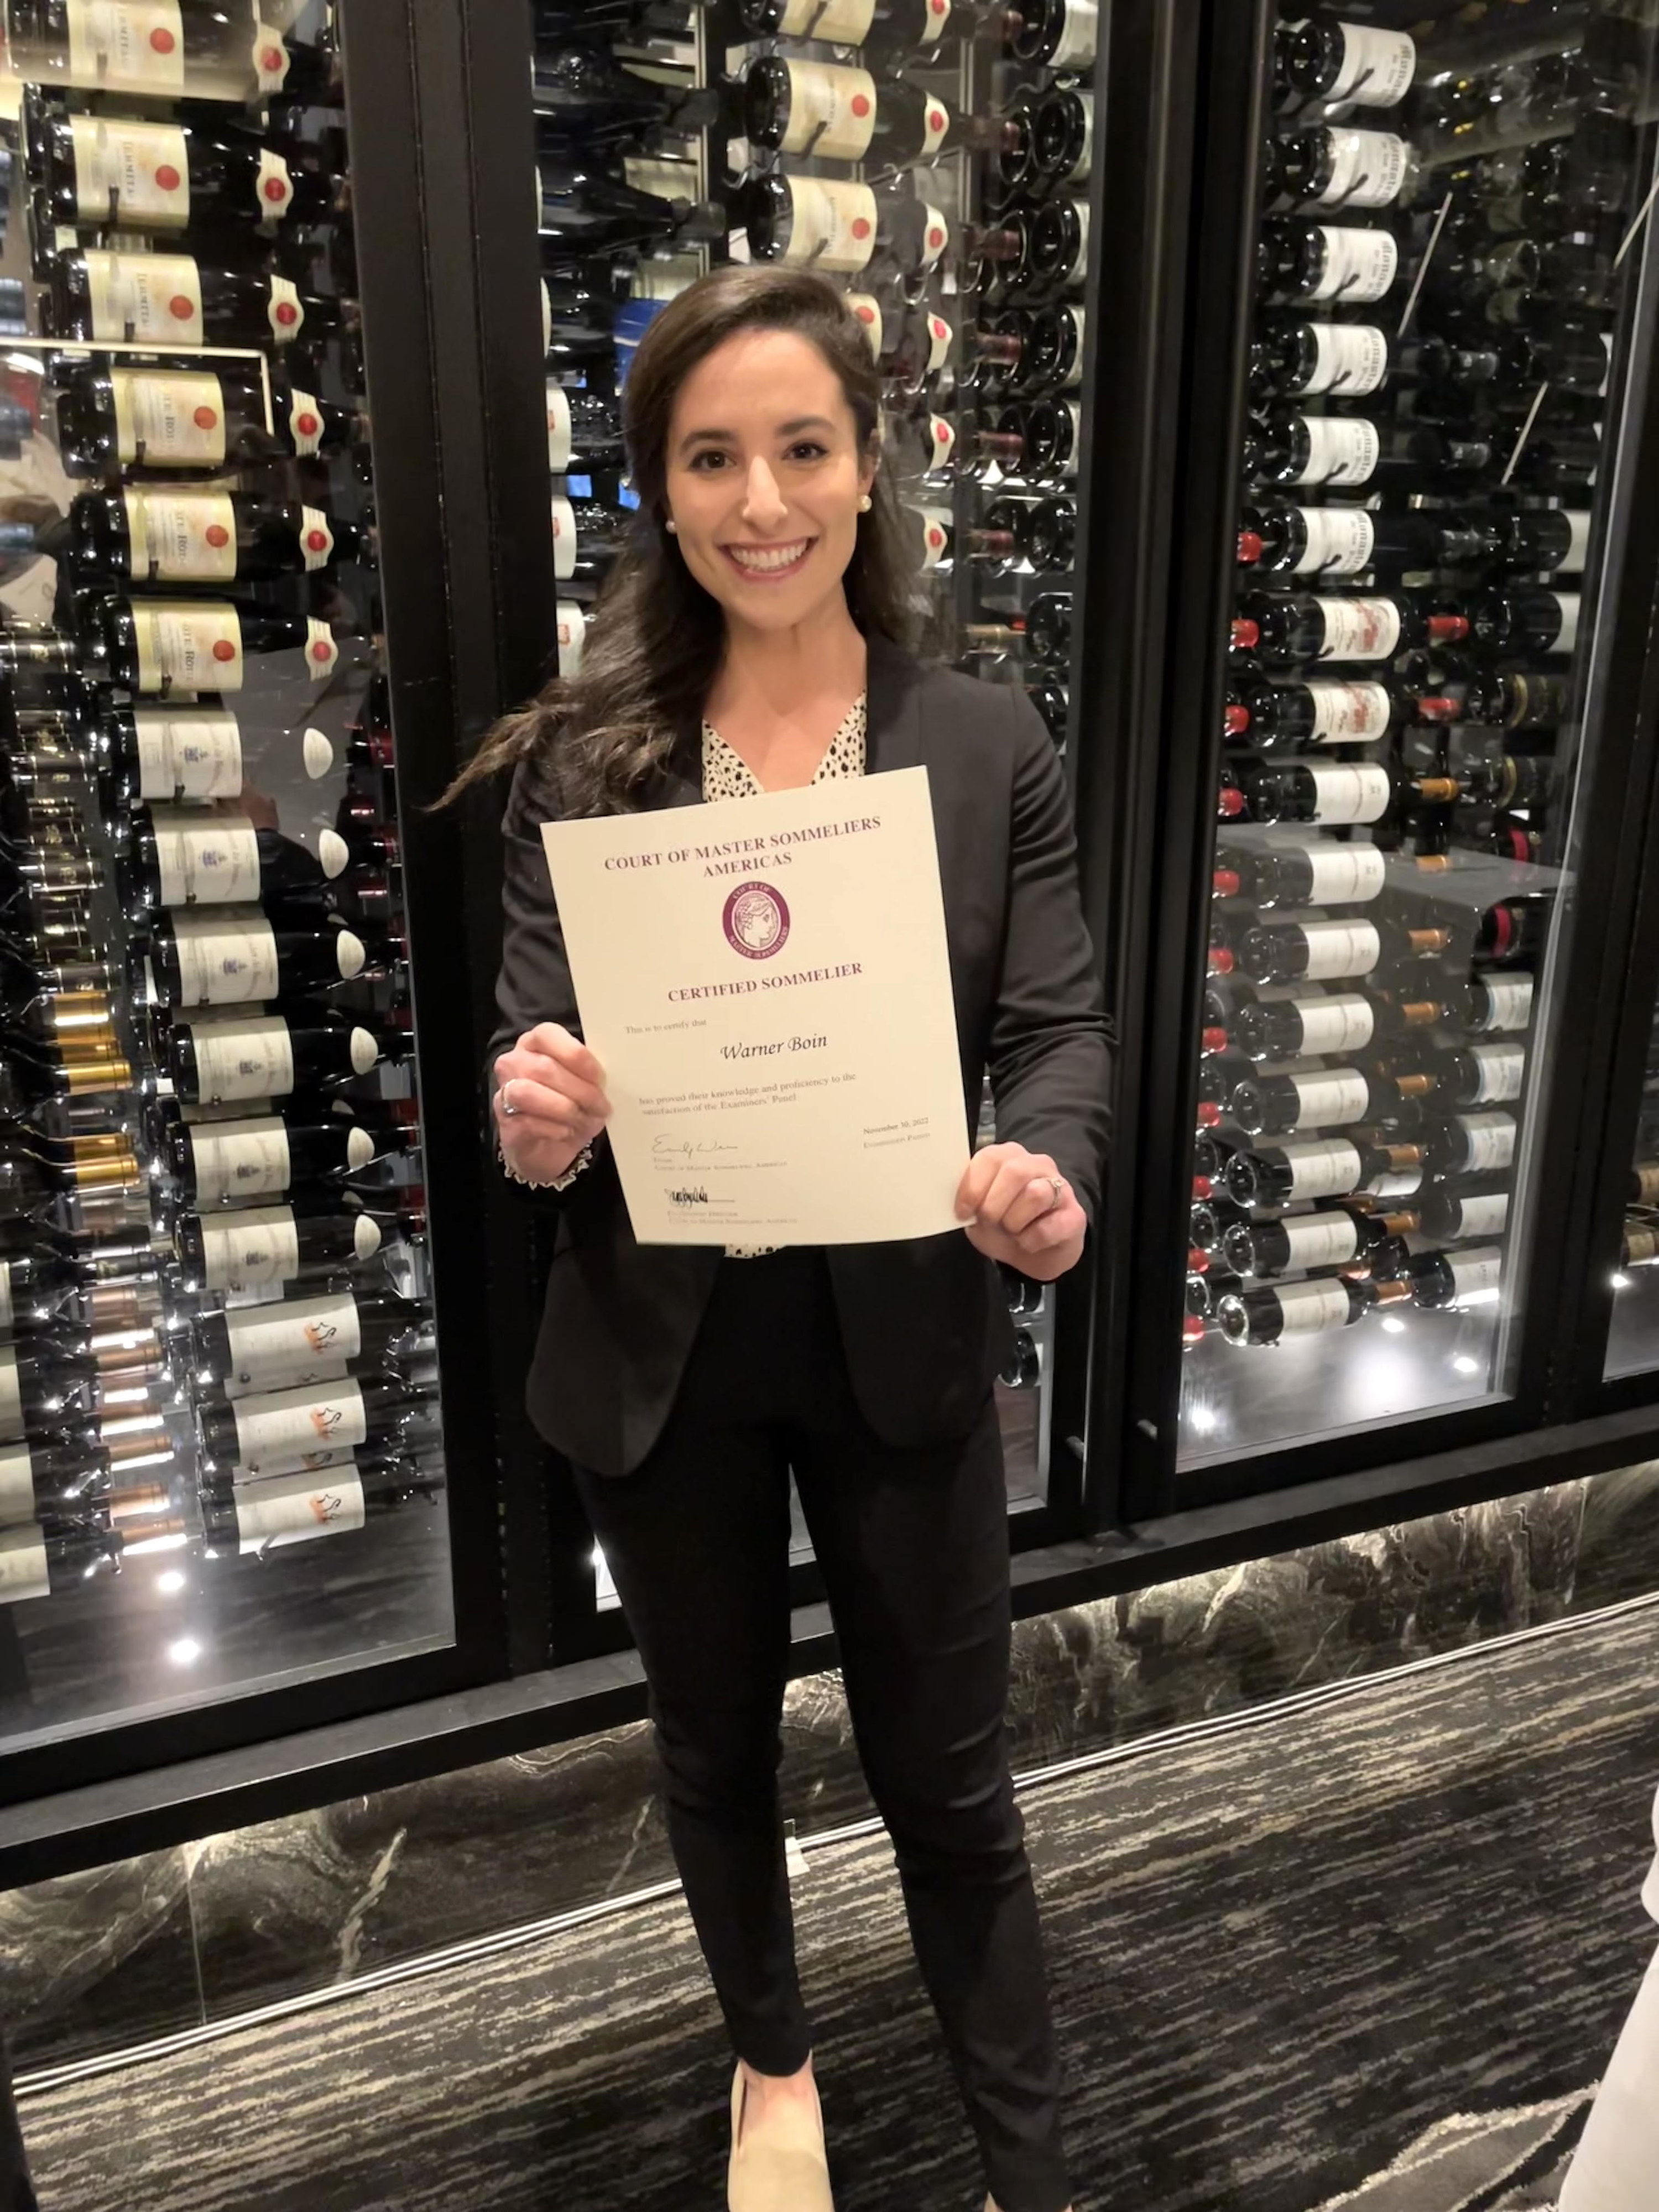 Warner holding her certificate after passing the sommelier exam